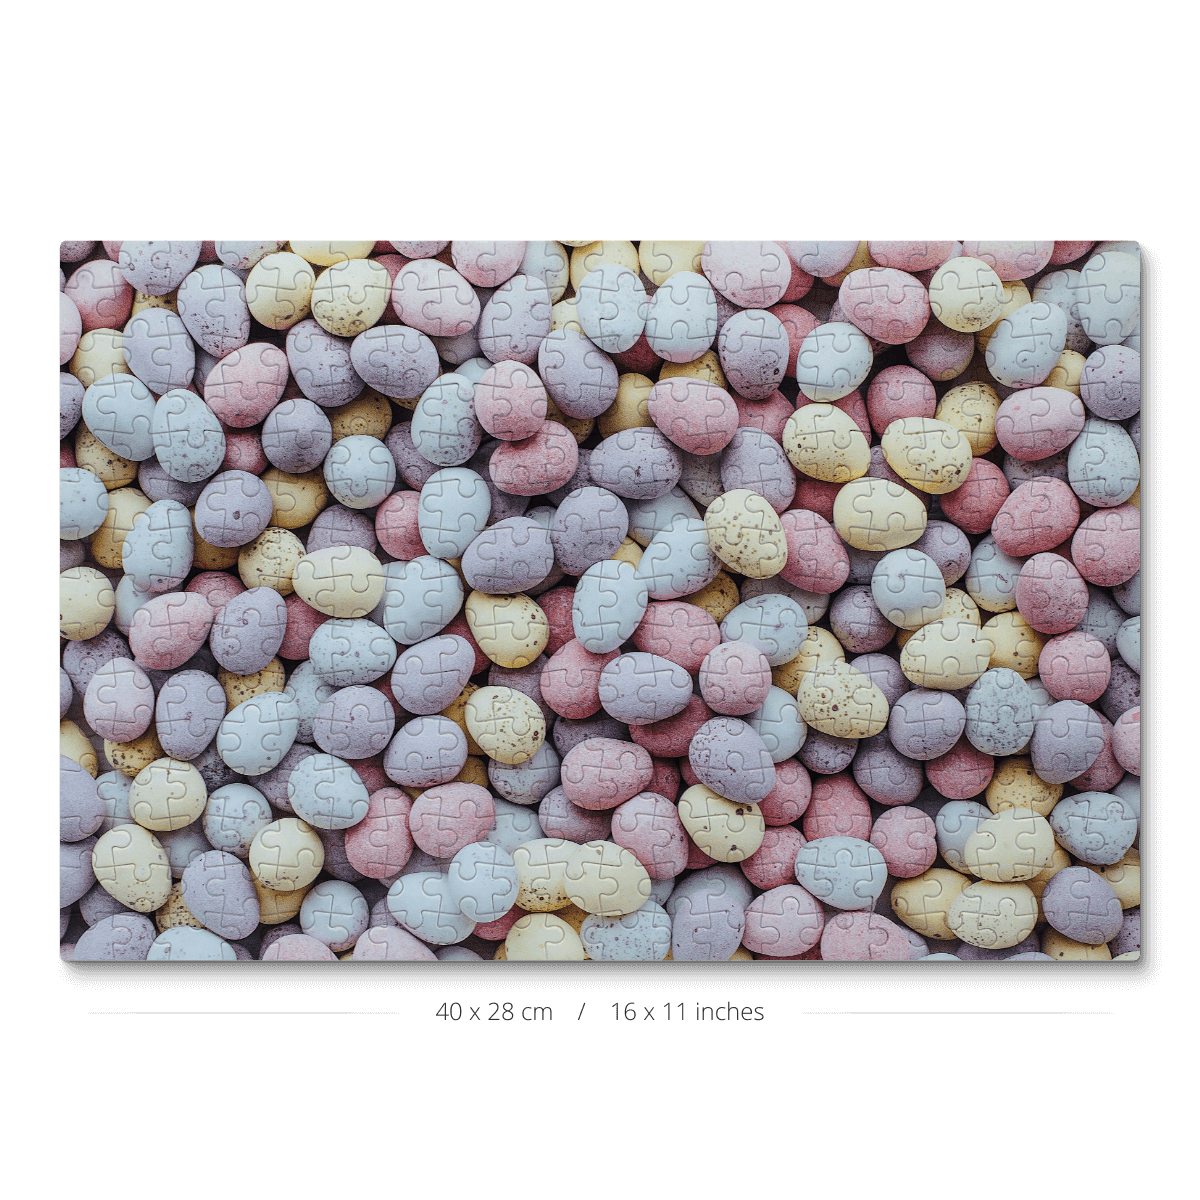 A 300-piece jigsaw puzzle featuring pastel-colored chocolate eggs.